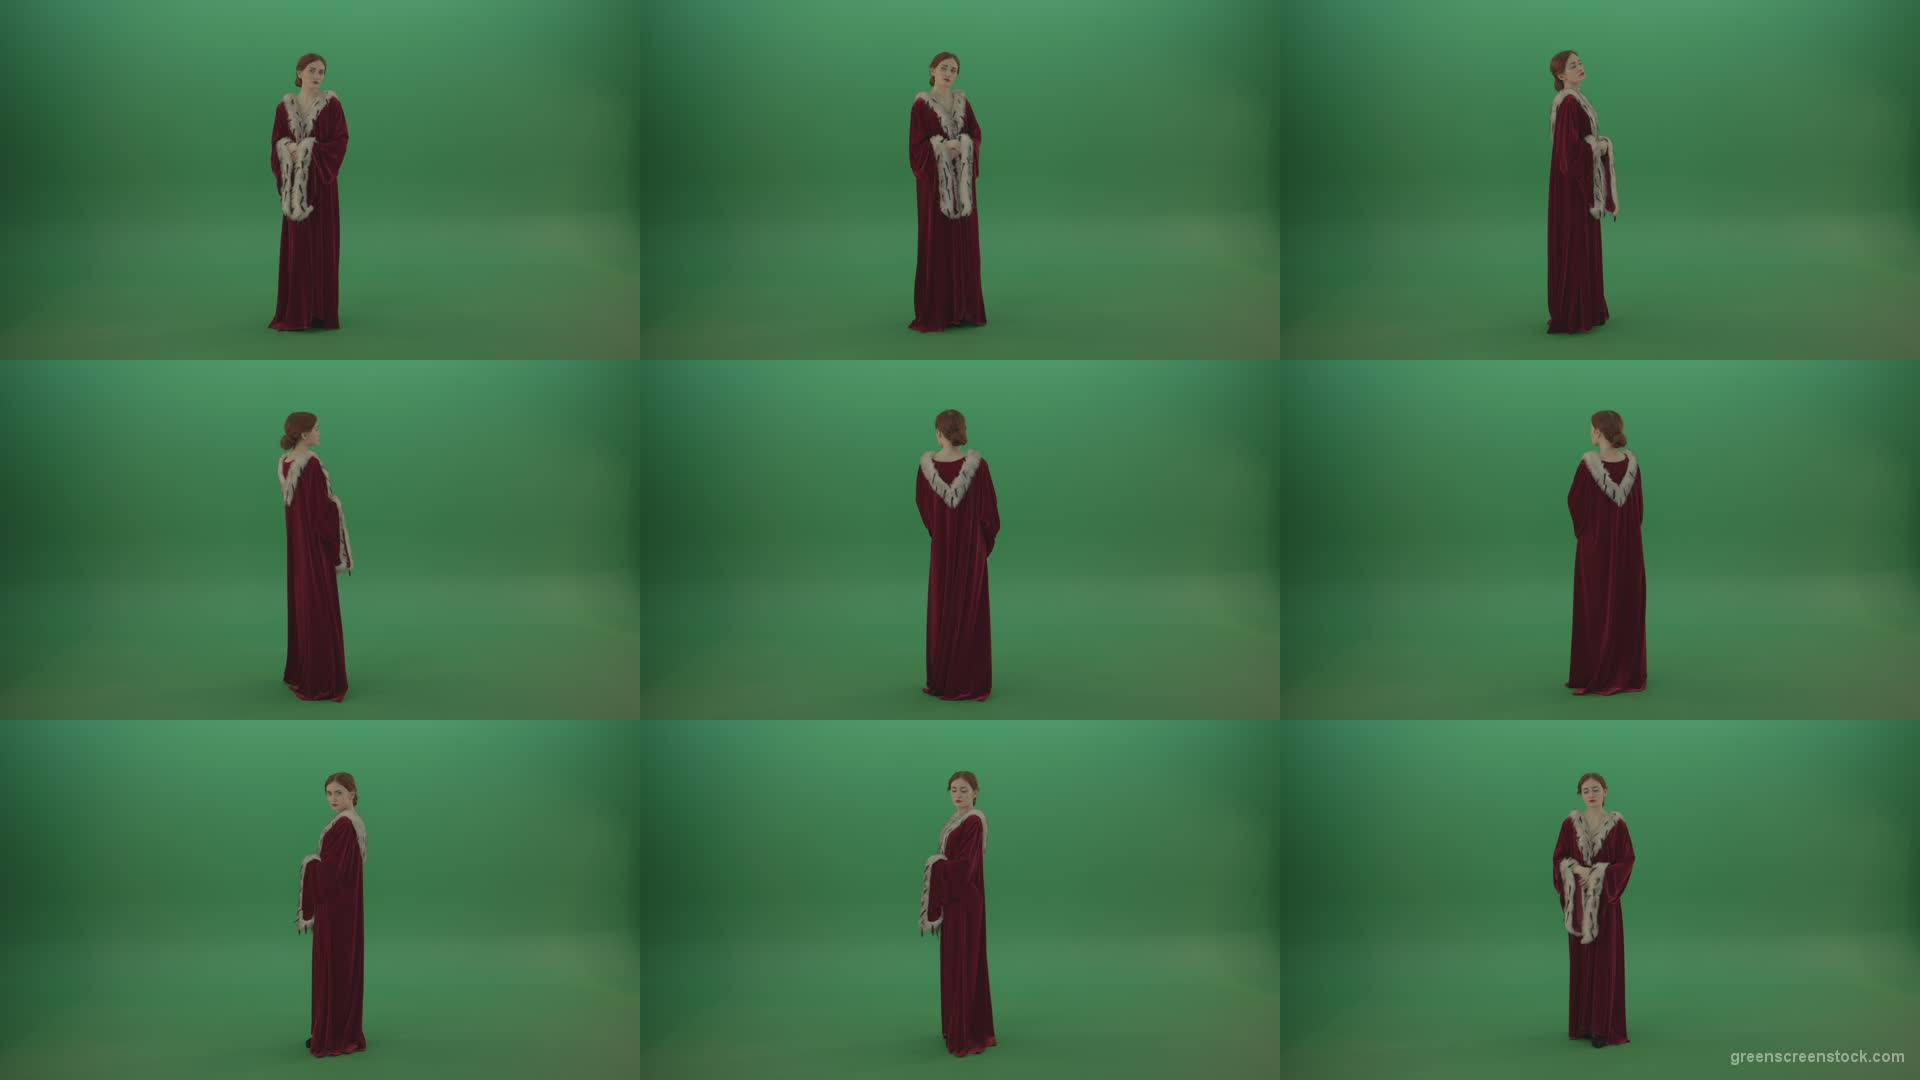 Elegant-woman-princess-with-light-movements-shows-her-beauty-dressed-in-red-cloak-on-a-green-background Green Screen Stock